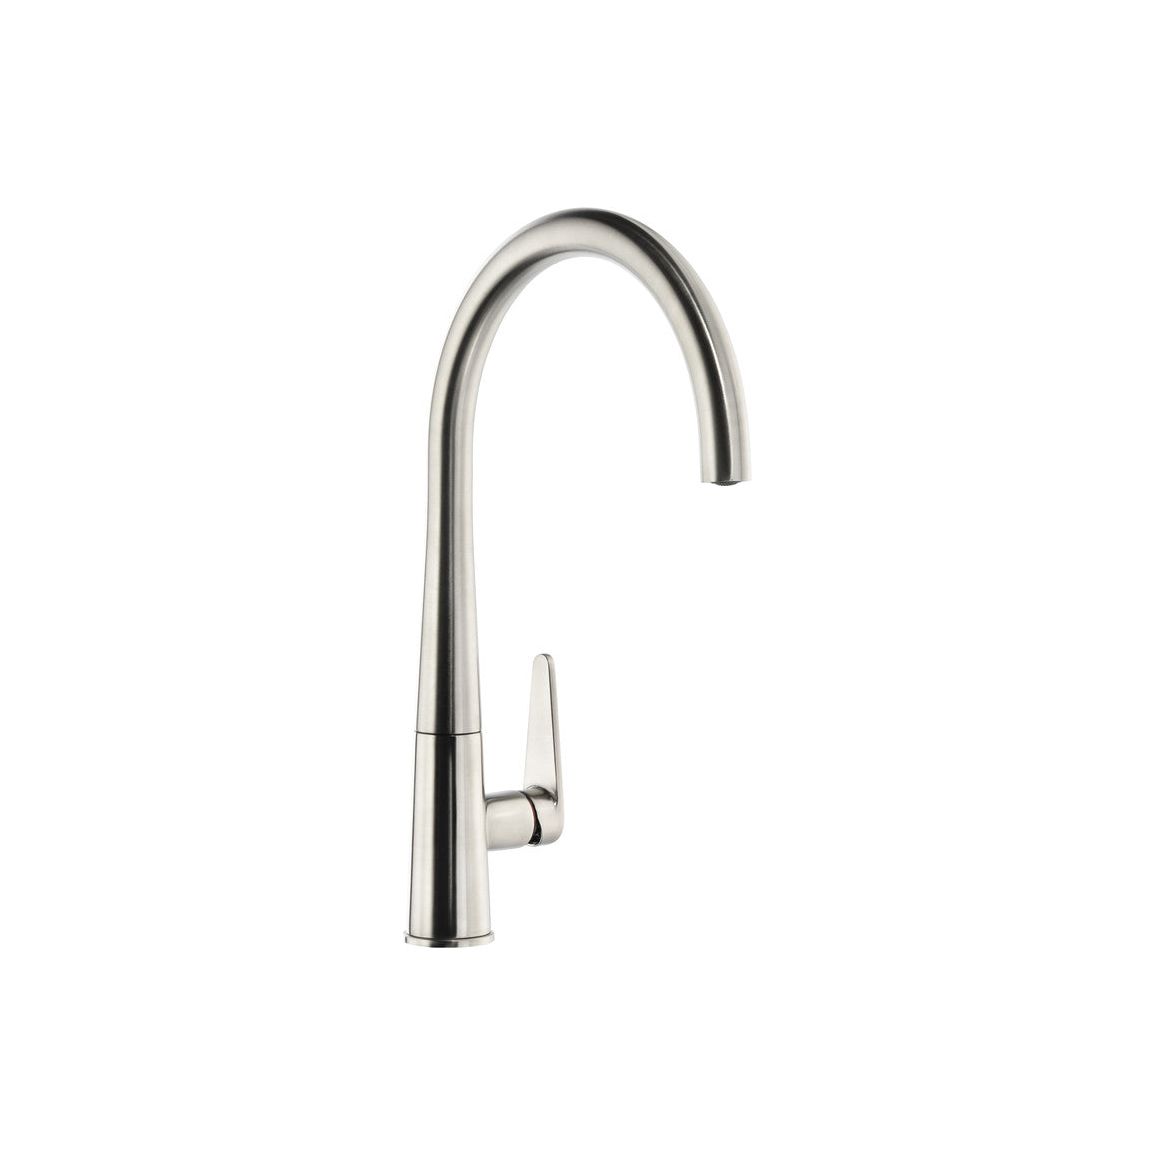 Abode Coniq R Single Lever Mixer Tap - Brushed Nickel